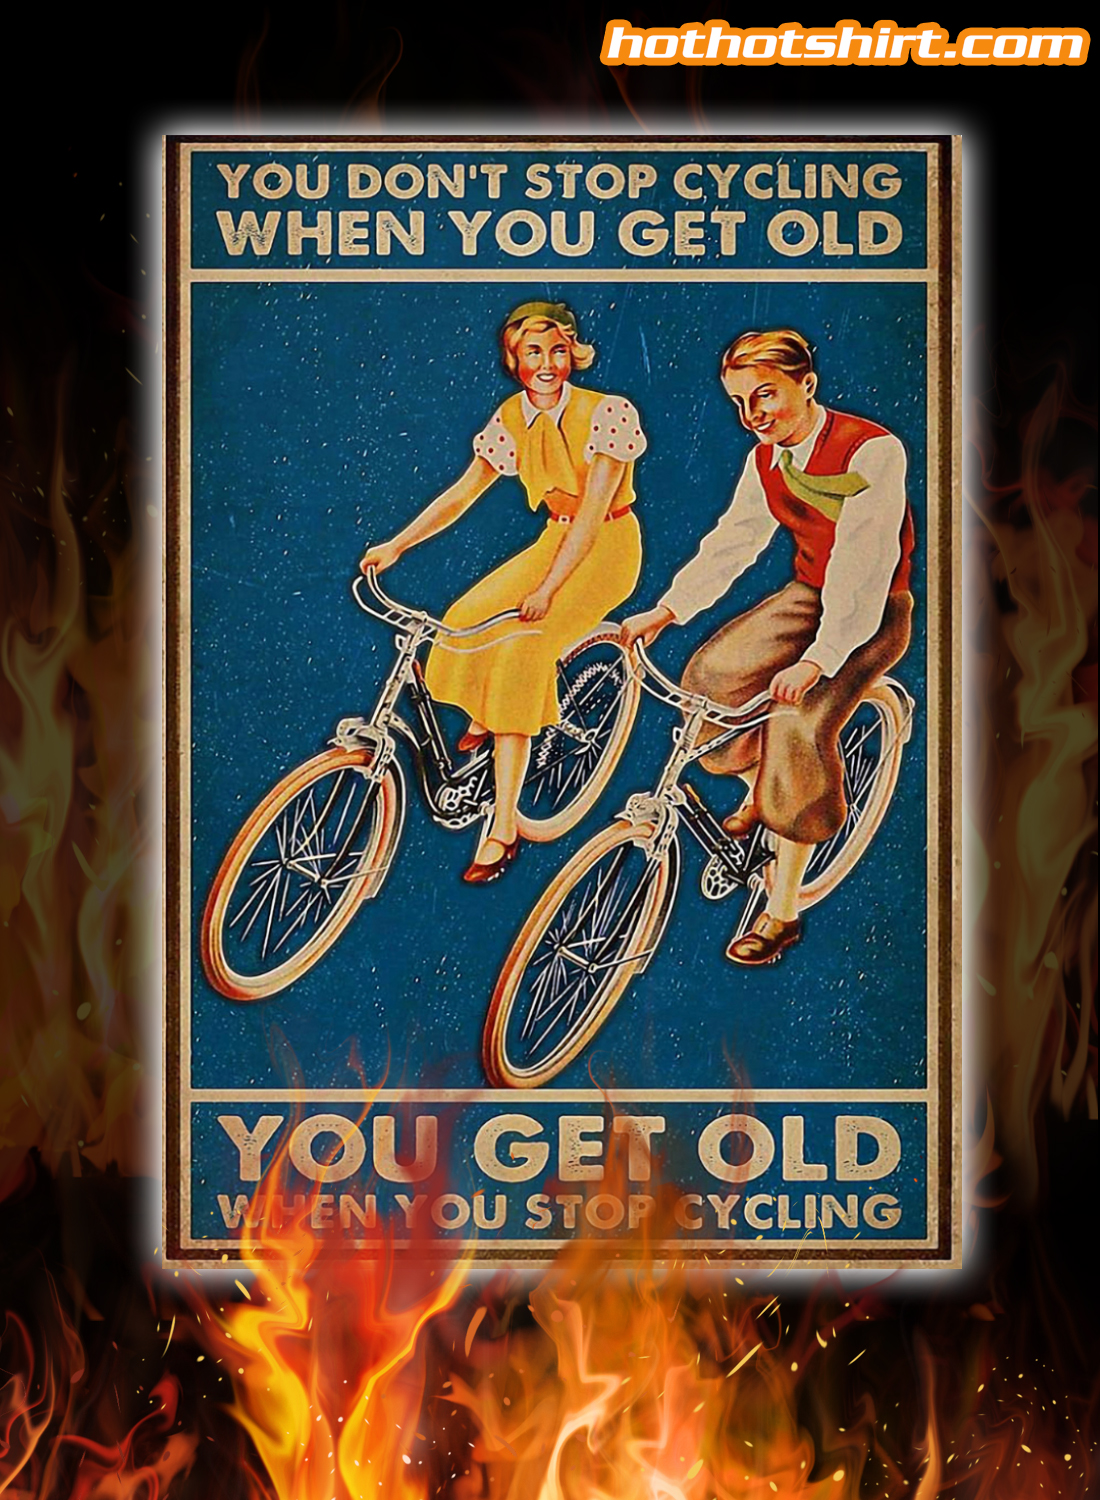 Couple cycling you don’t stop cycling when you get old poster